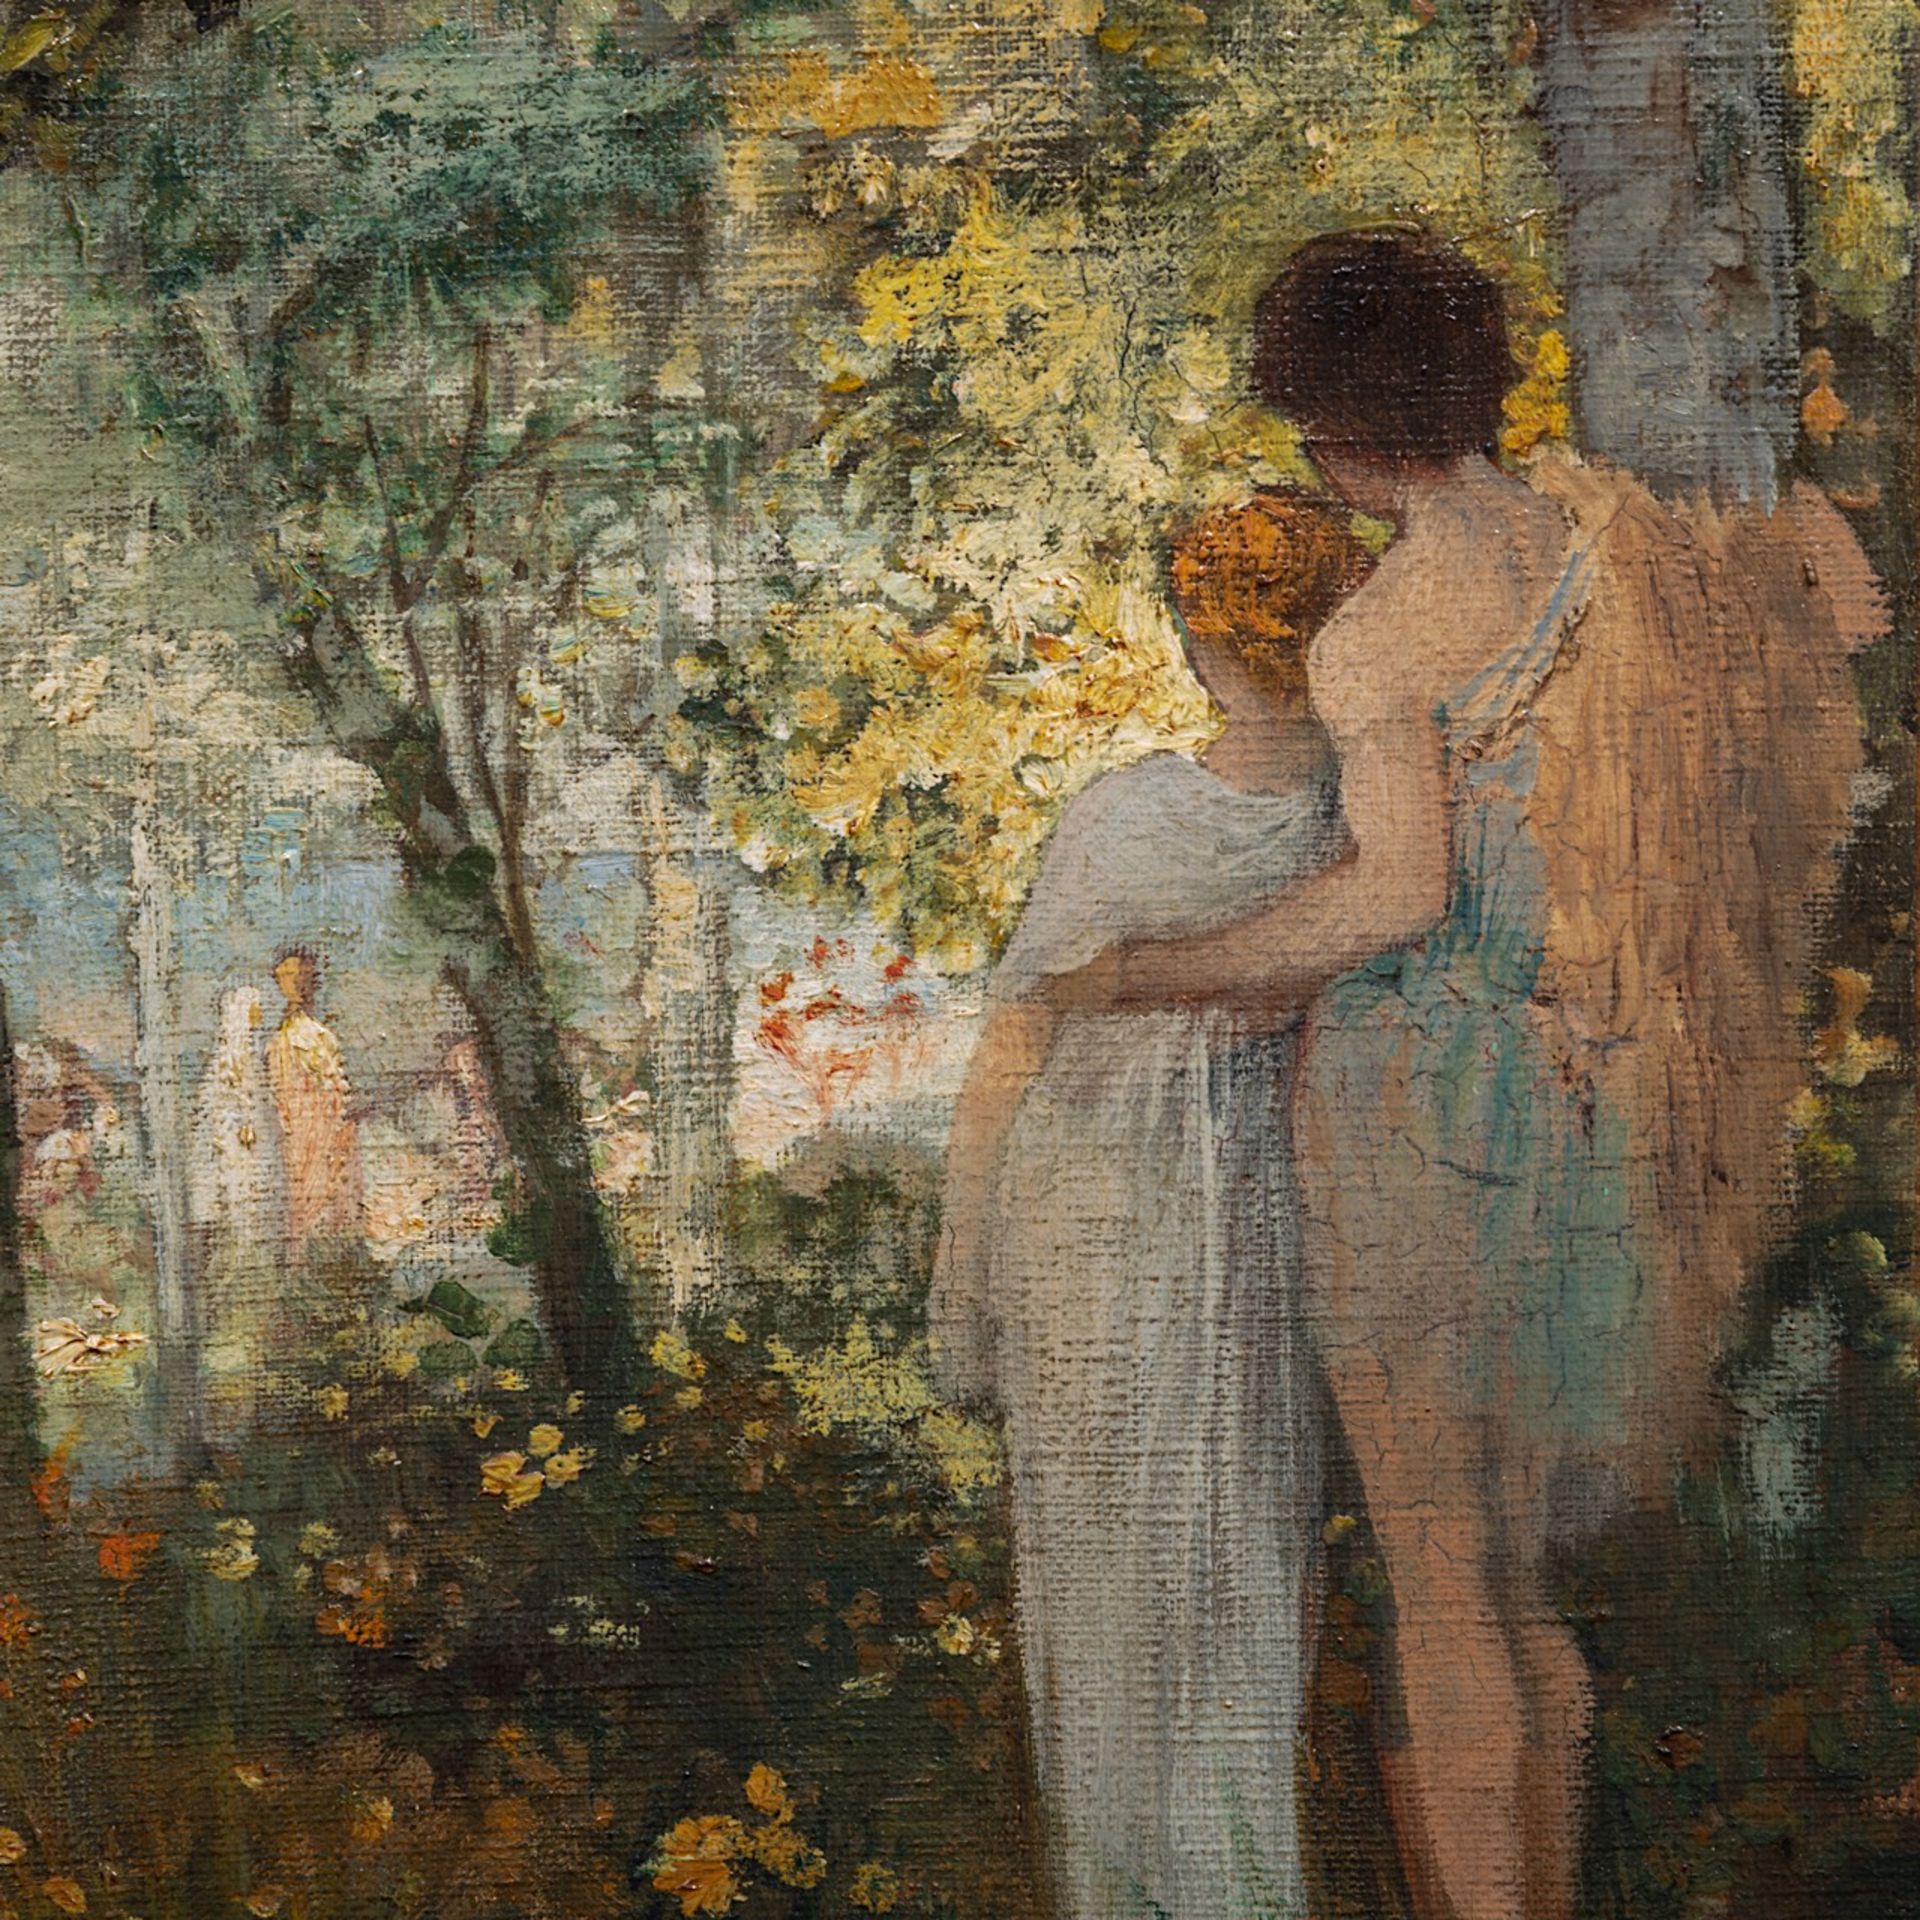 Emile Levy (1826-1890), Romance in the Forest, oil on canvas 27 x 27 cm. (10.6 x 10.6 in.), Frame: 4 - Bild 5 aus 6